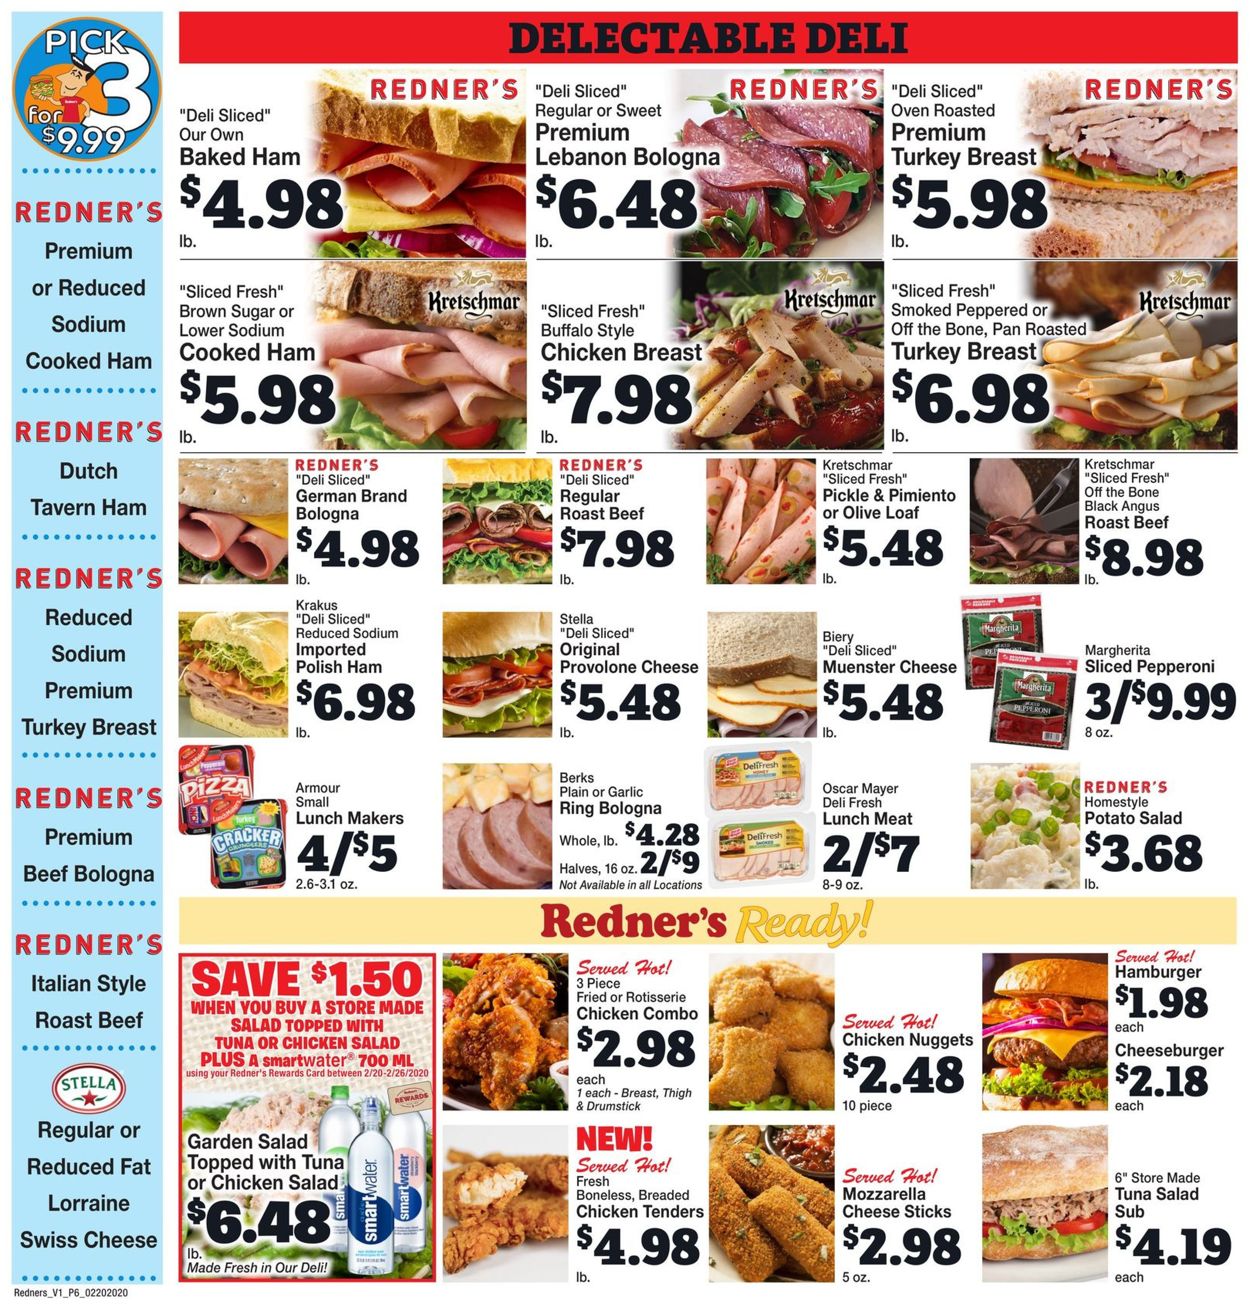 Catalogue Redner’s Warehouse Market from 02/20/2020